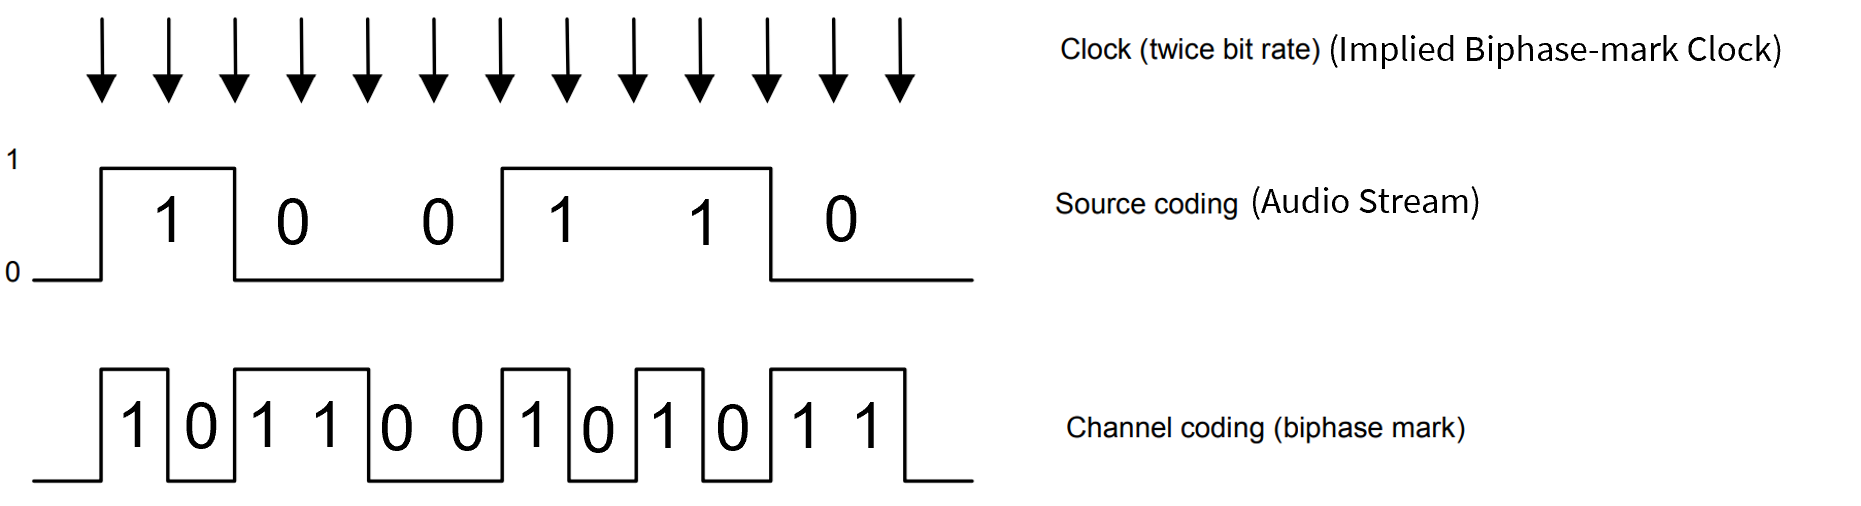 Diagram illustrating the channel coding and source coding with an implied biphase-mark clock